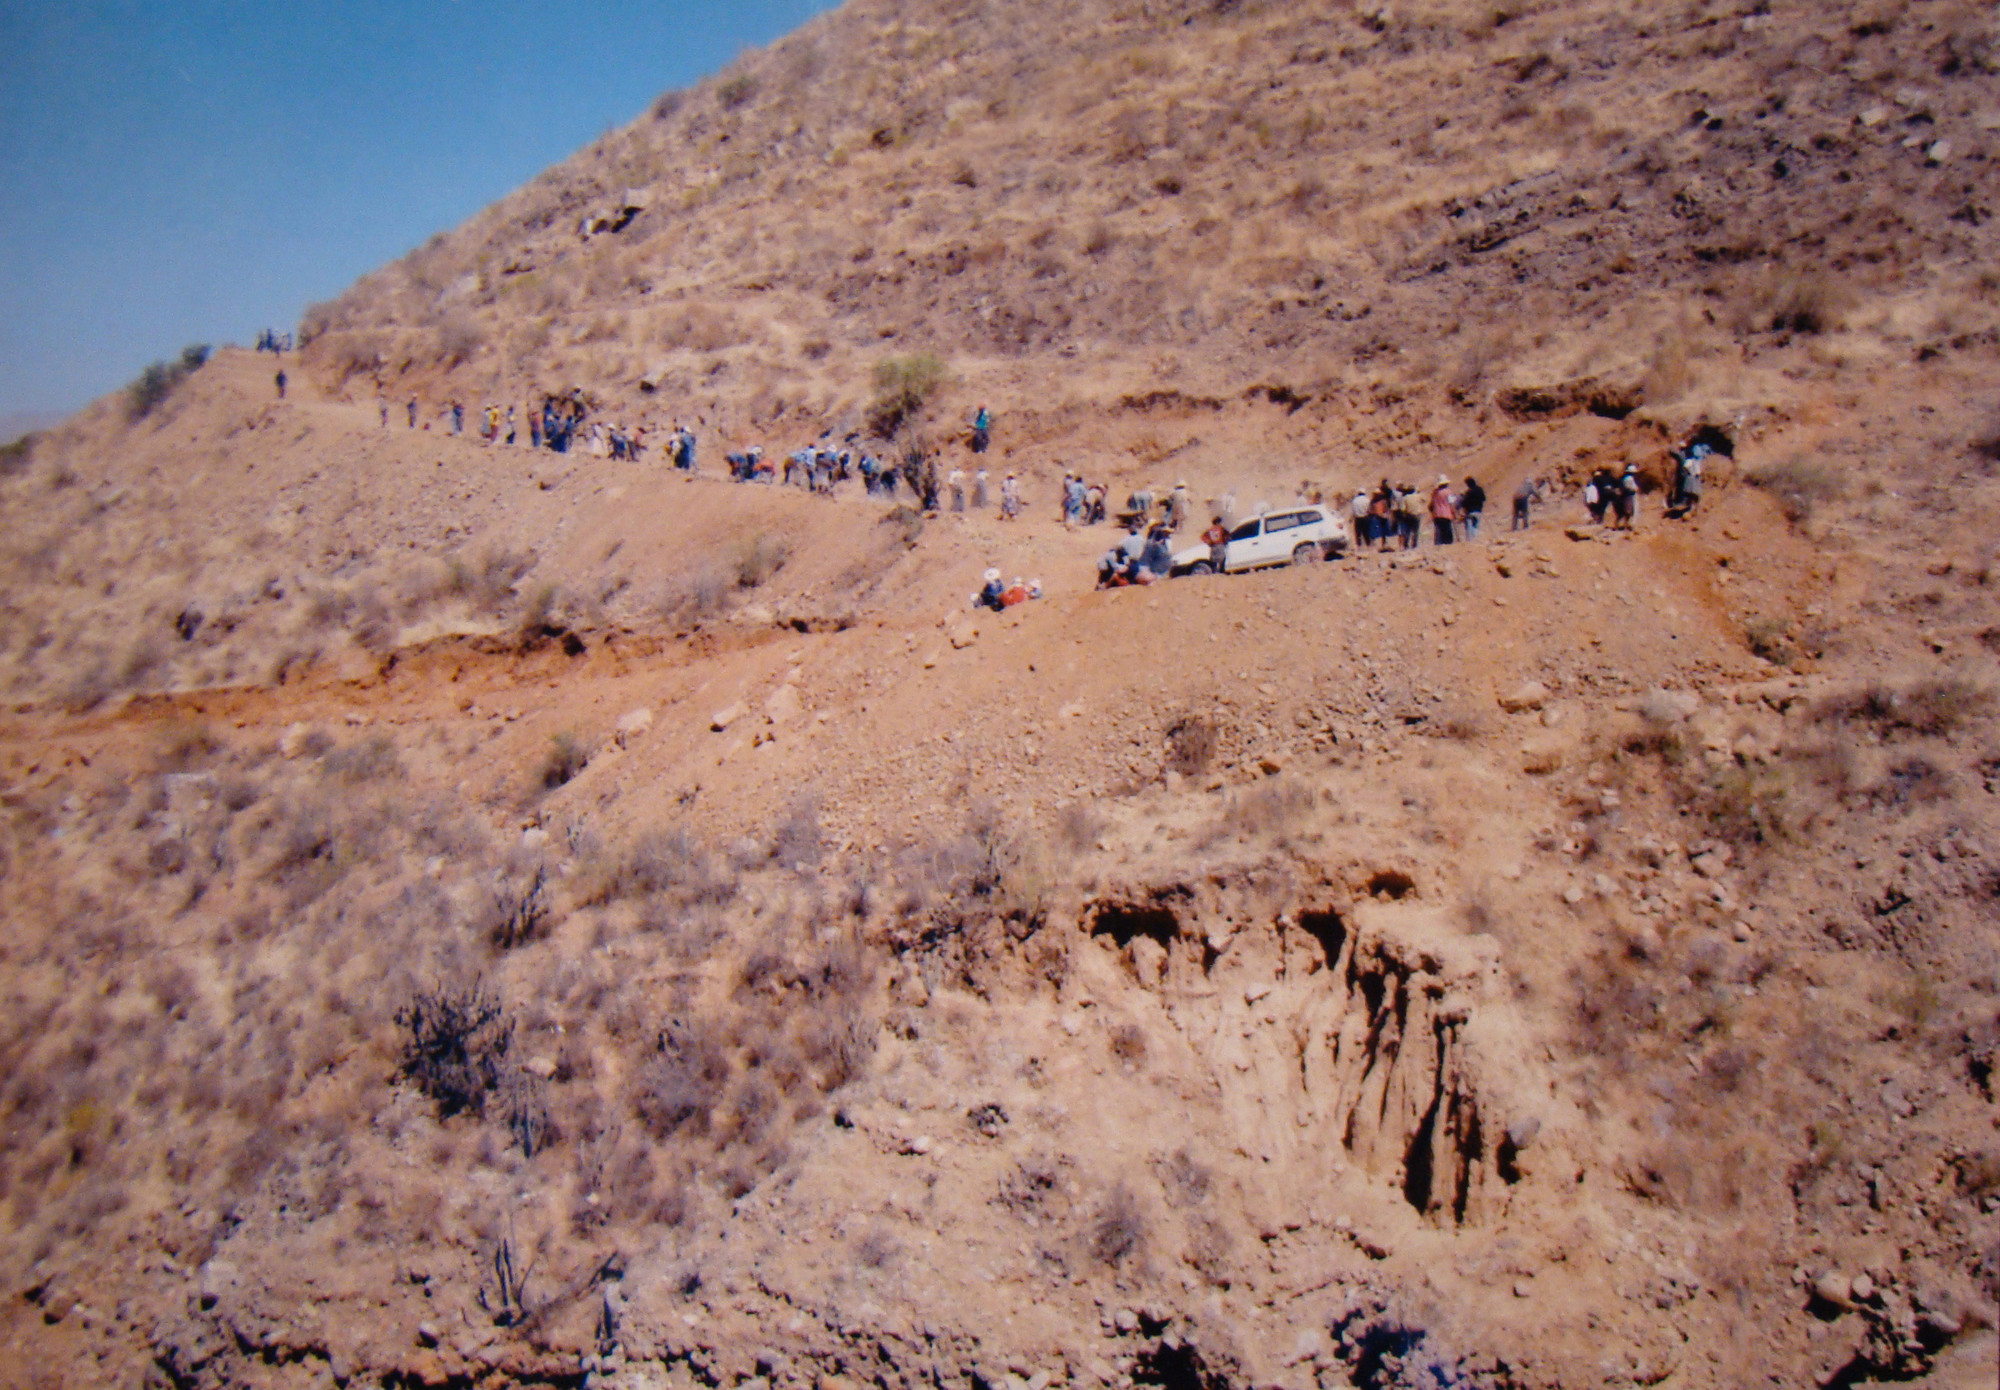 A line of people climb up a switchback on a red-brown sandy, rocky hill.